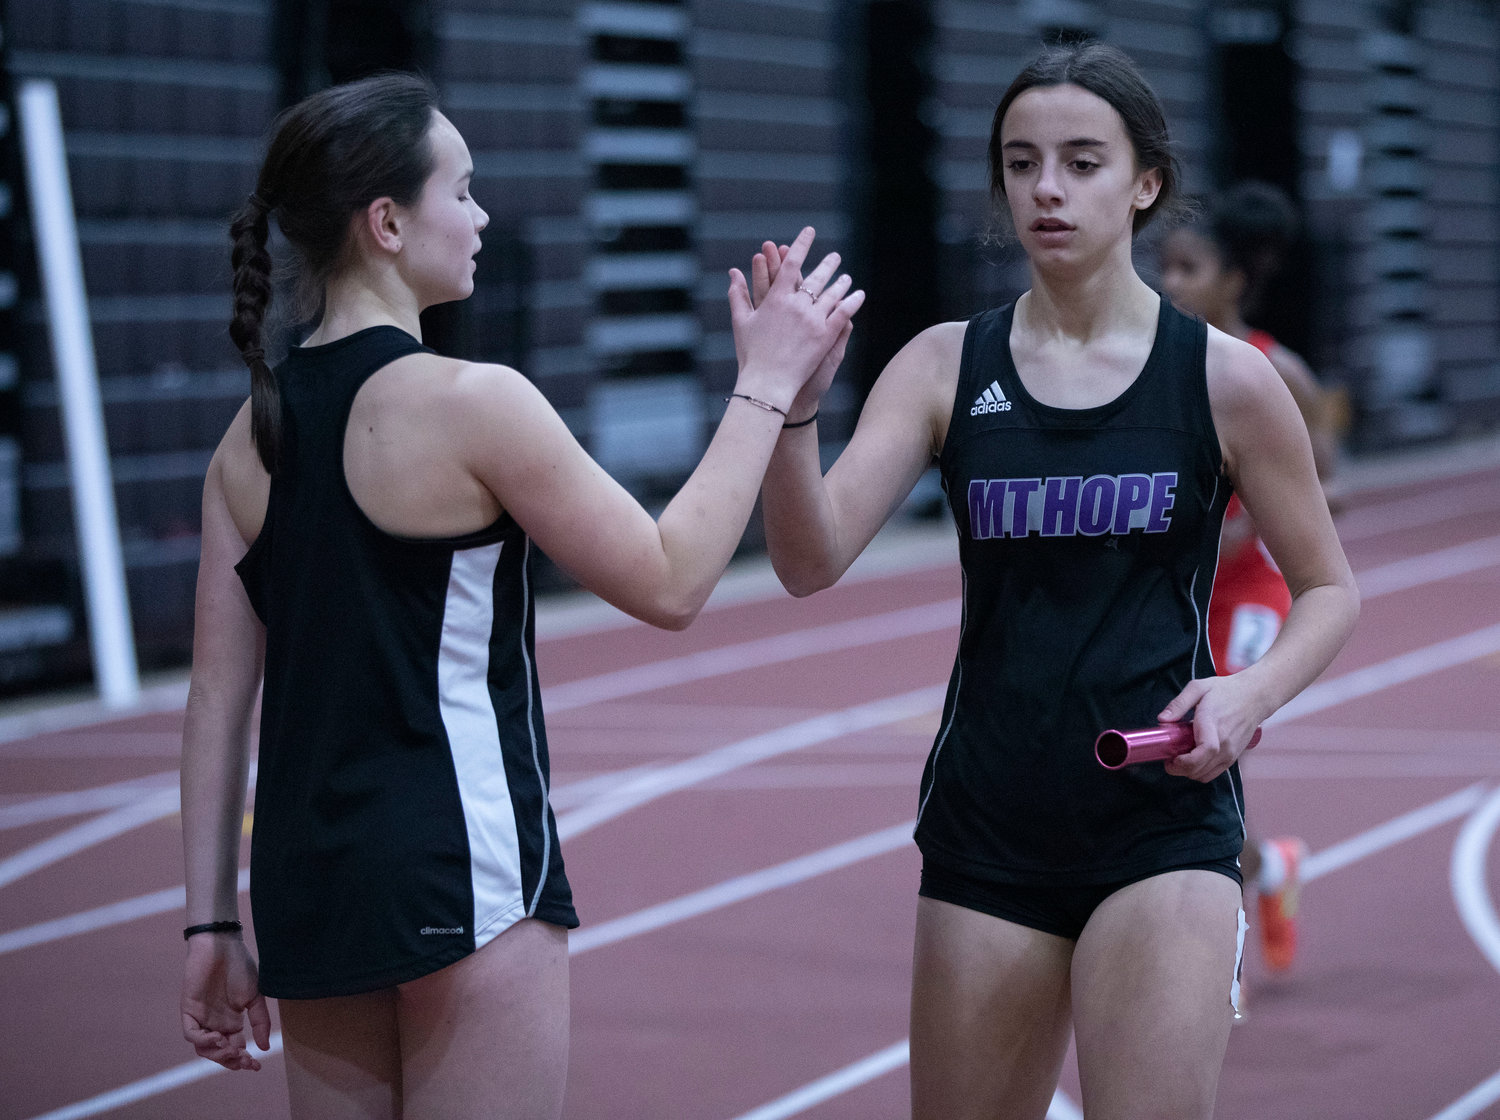 Ryan Coffey high fives teammate Thea Jackson after they placed second in their heat during the 4x400 relay.